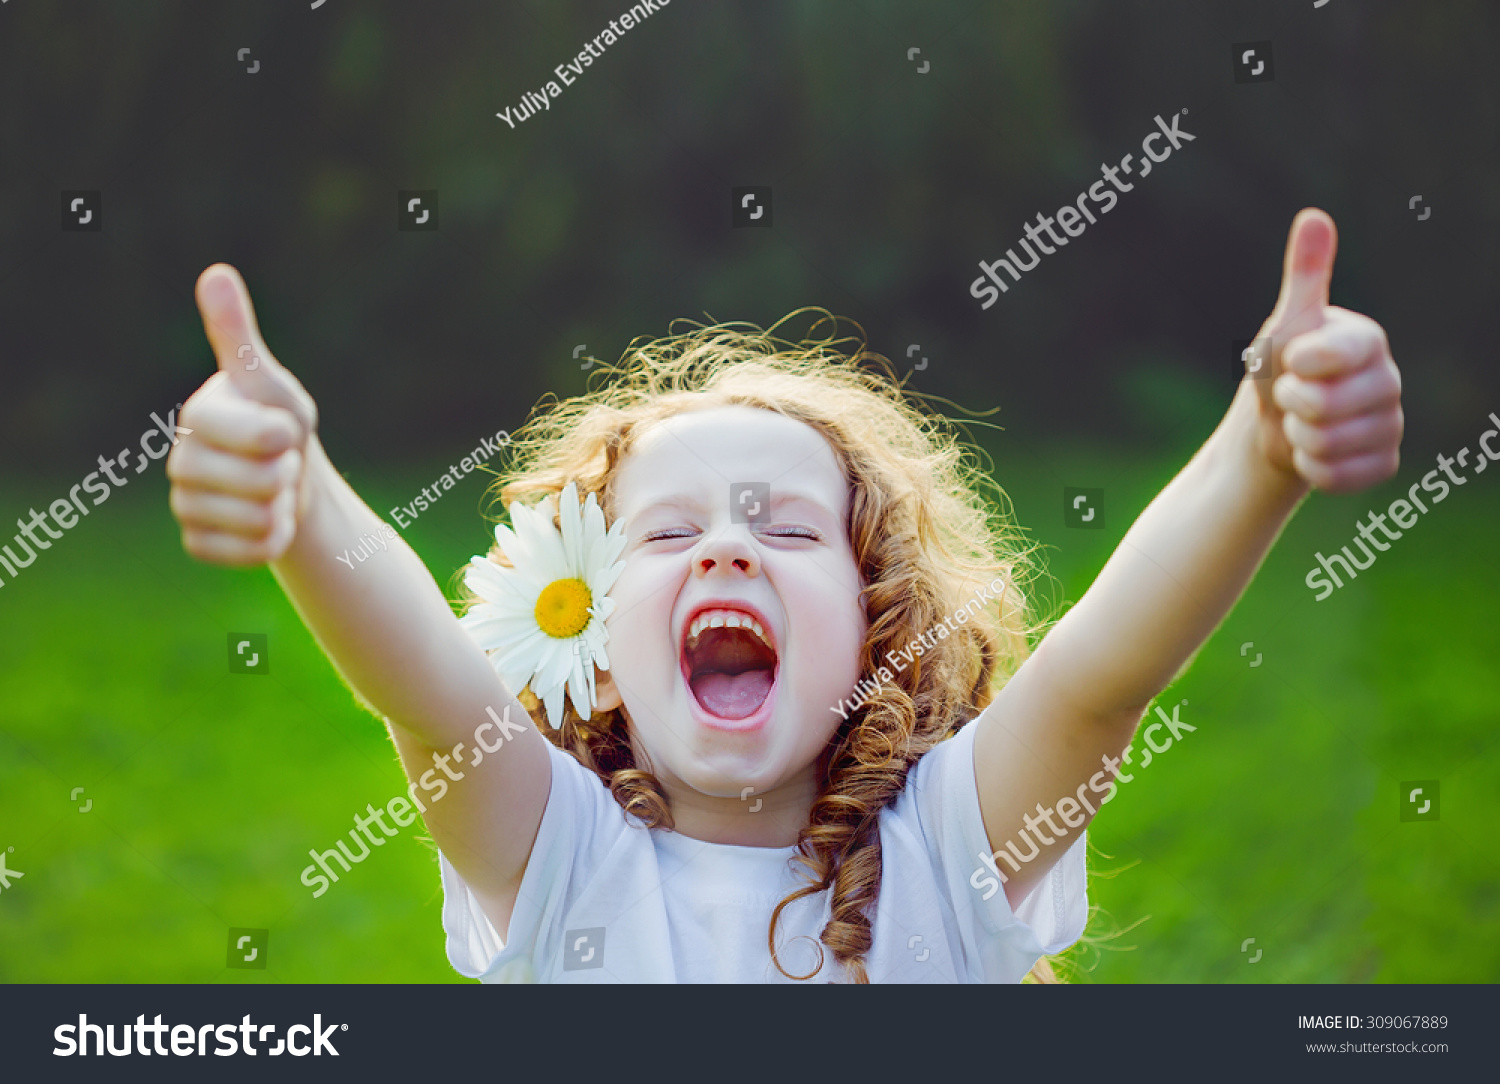 Laughing girl with daisy in her hairs, showing thumbs up. #309067889